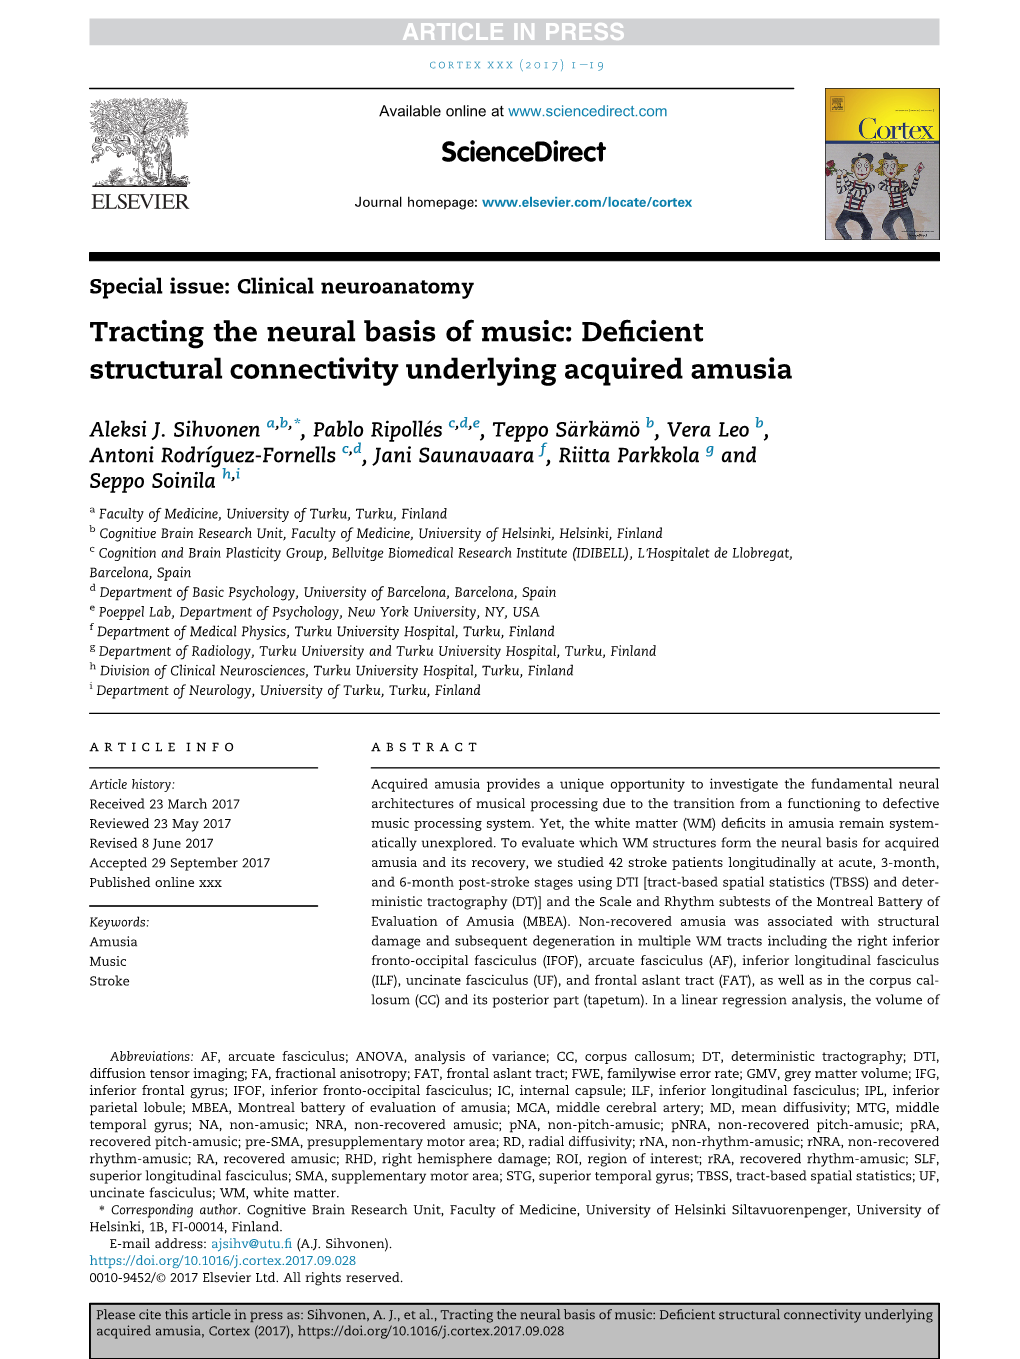 Tracting the Neural Basis of Music: Deficient Structural Connectivity Underlying Acquired Amusia